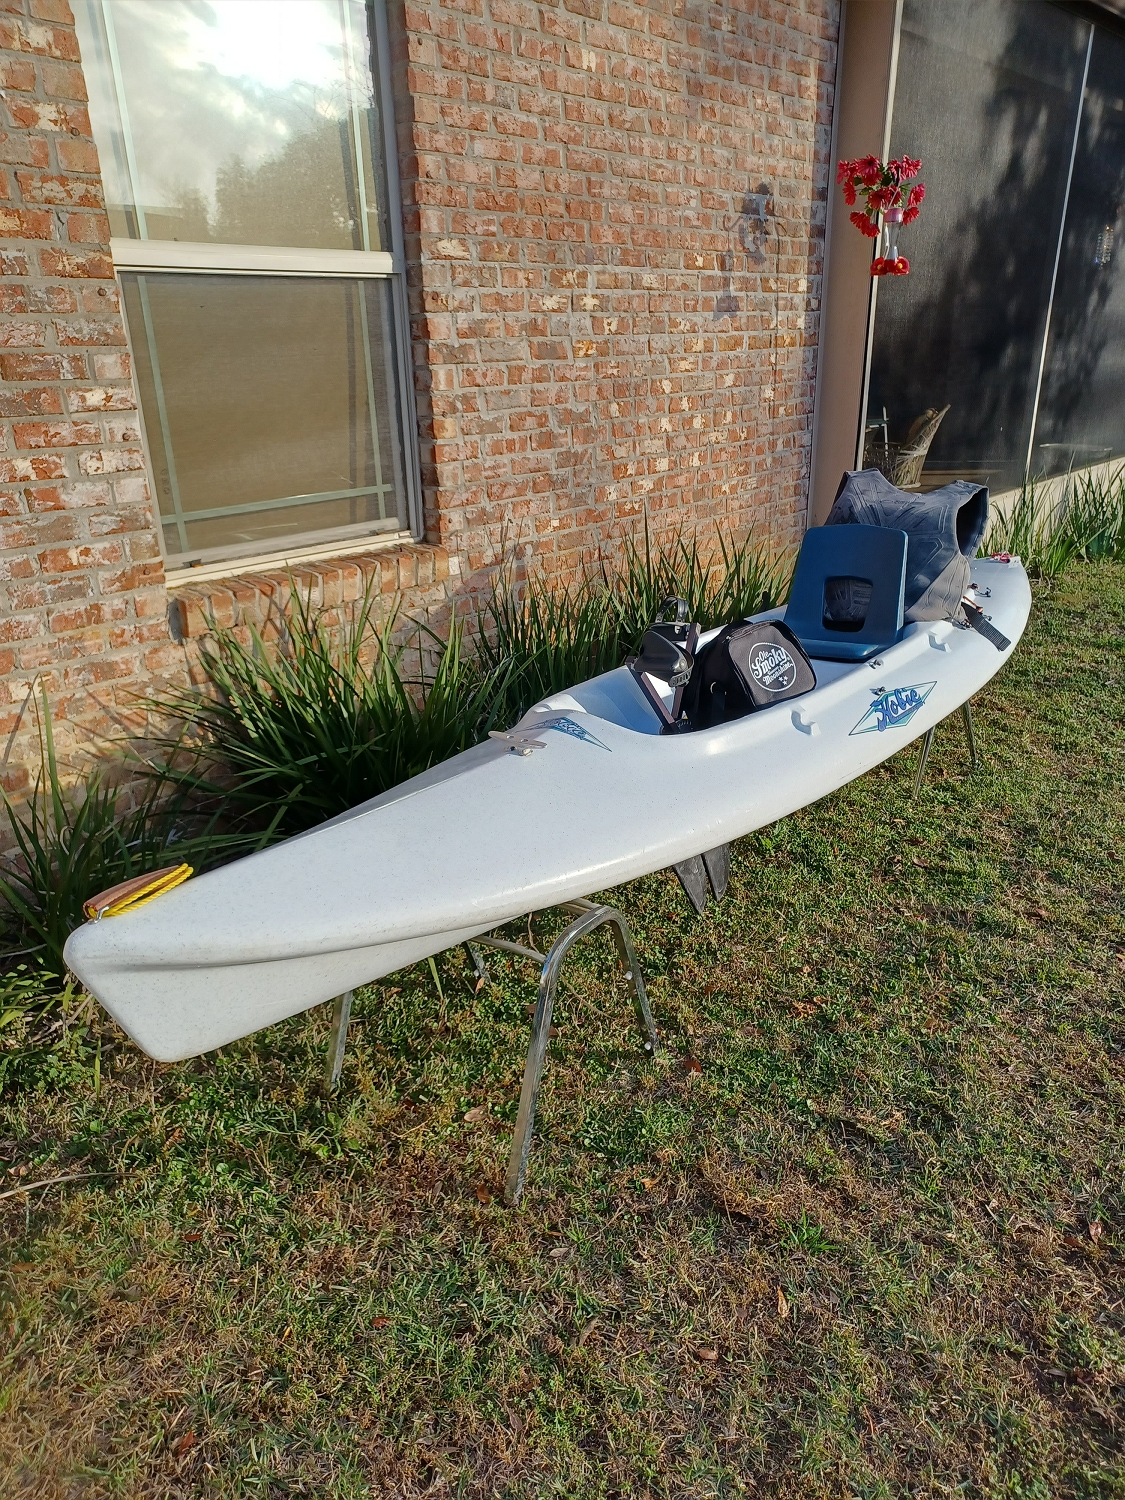 Used Hobie Boats For Sale by owner | 2019 12 foot Hobie mirage pedal